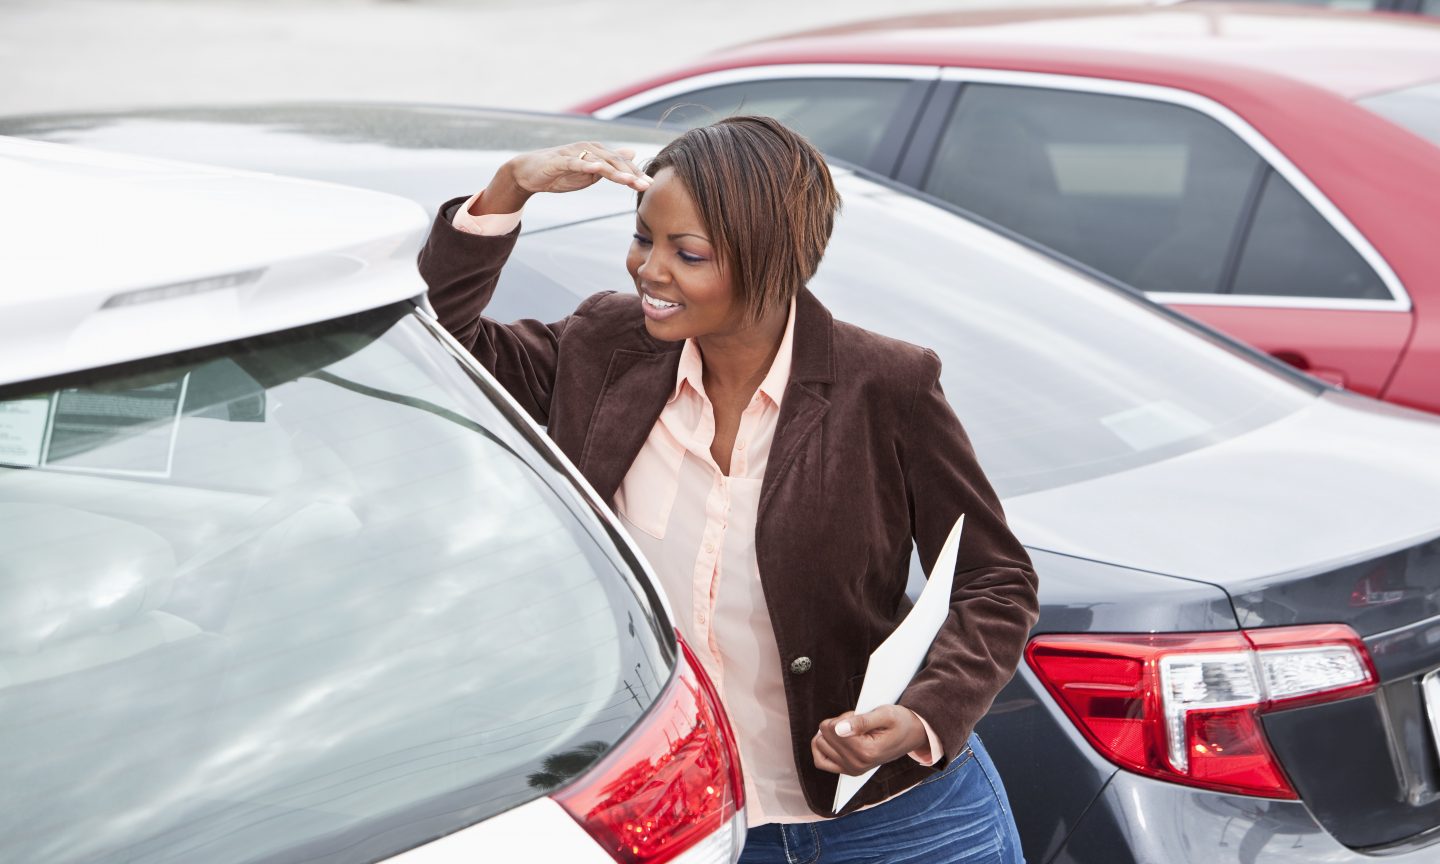 Car Lease Calculator Get The Best Deal On Your New Wheels - Nerdwallet